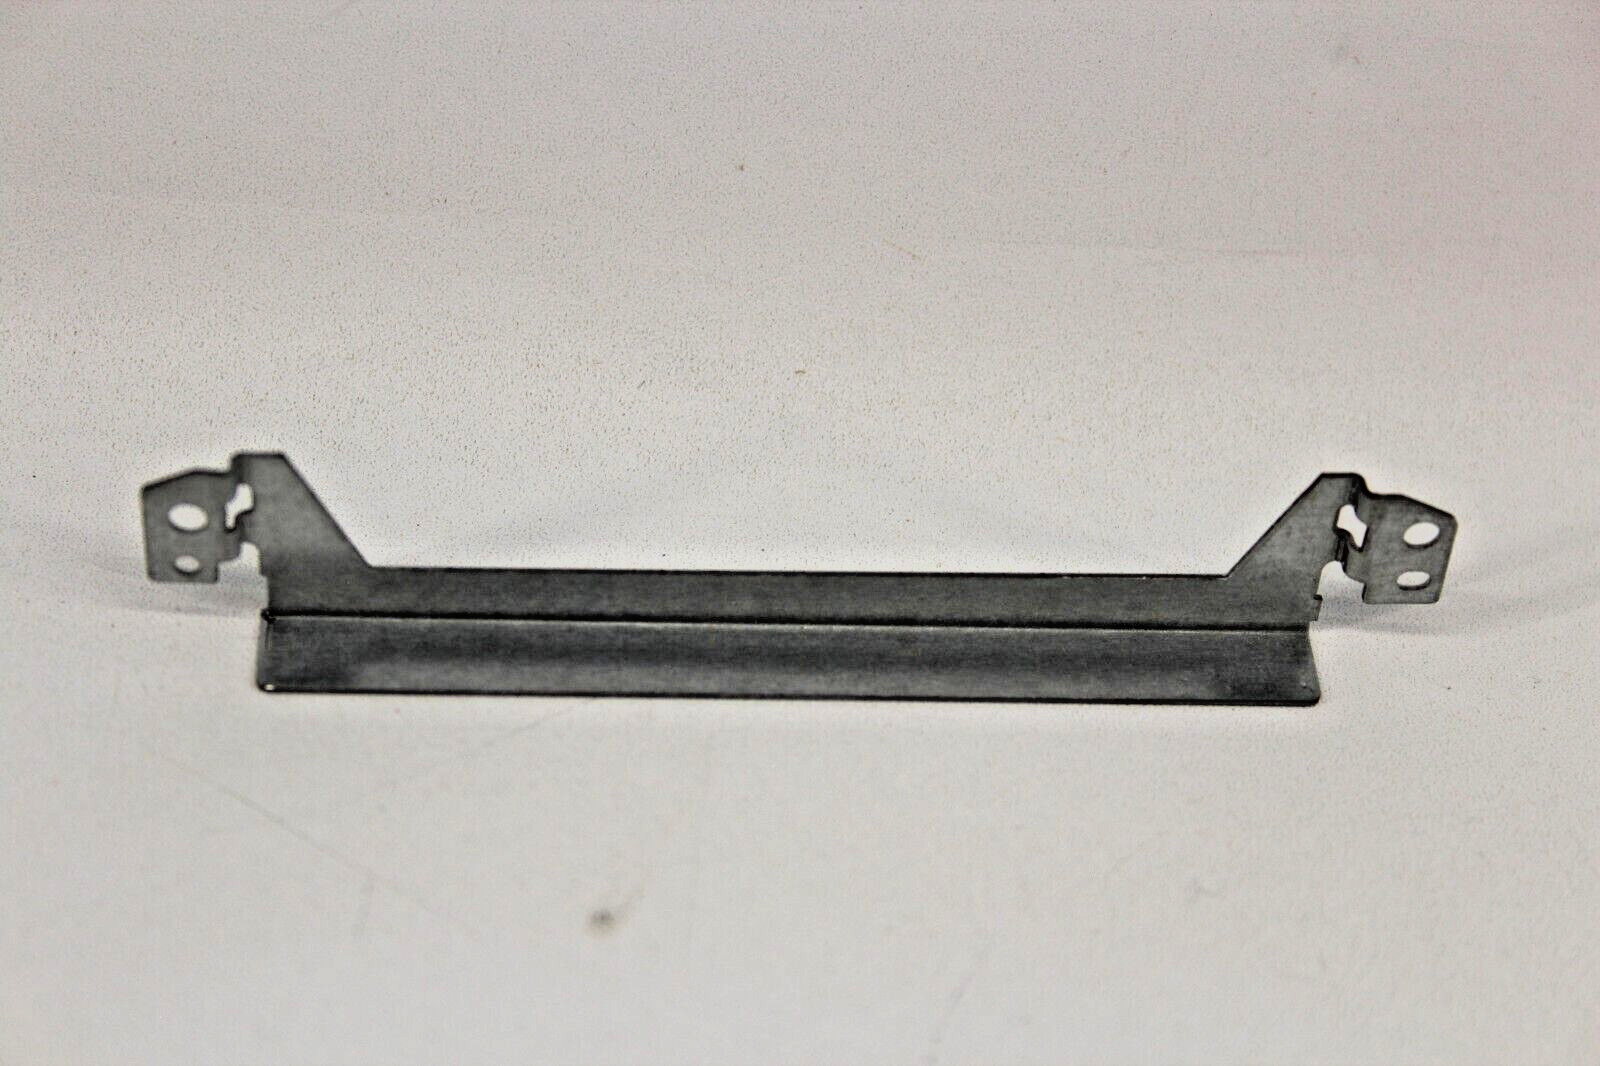 0FPNX Dell LATITUDE E5440 LAPTOP HARD DRIVE CADDY METAL SECURING BRACKET NEW~